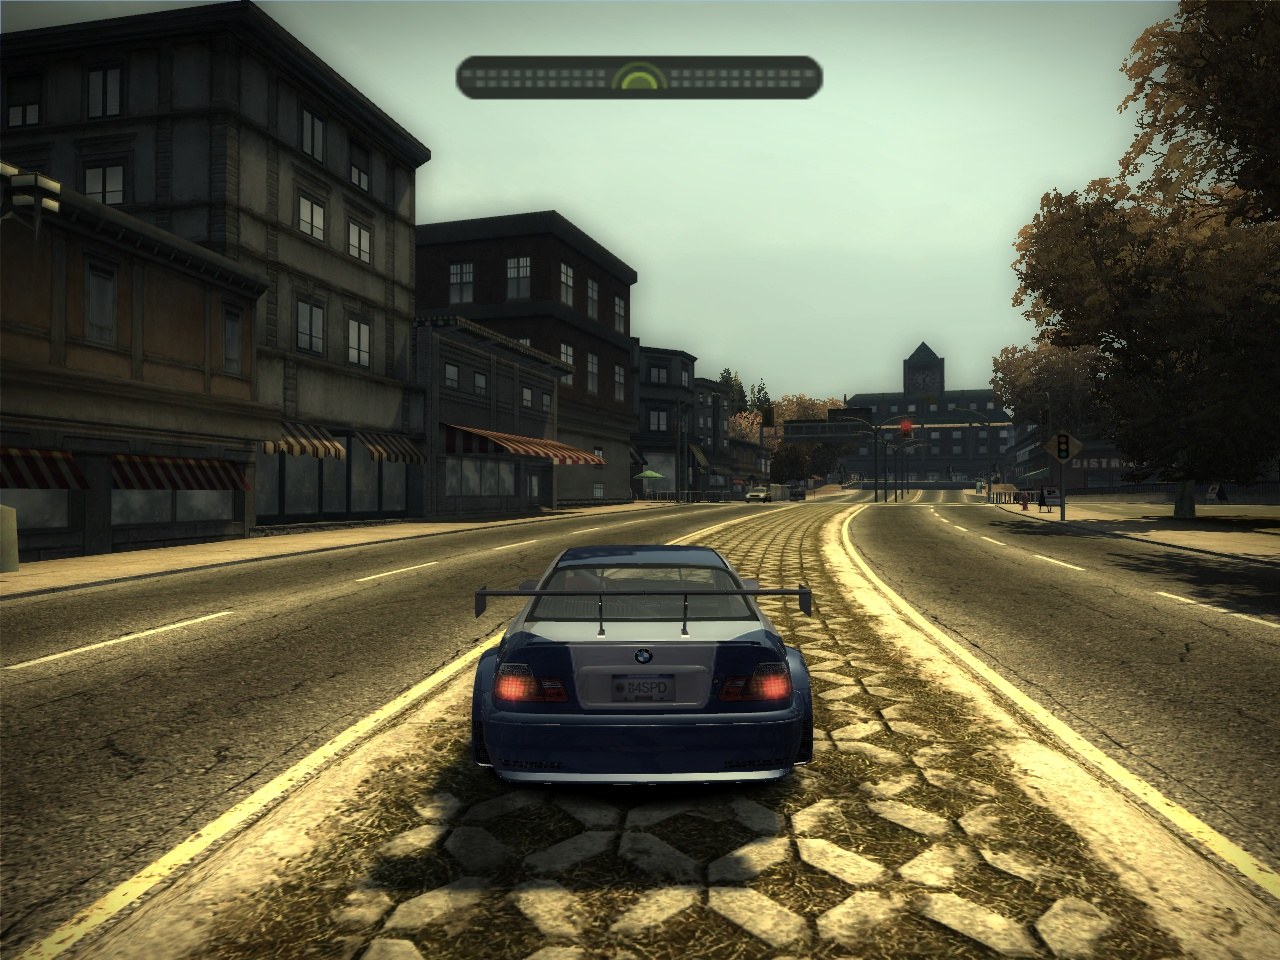 Игры гонки недфорспид. Need for Speed most wanted 2005. Нфс most wanted. NFS most wanted 2005 мост. Гонки NFS most wanted 2005.